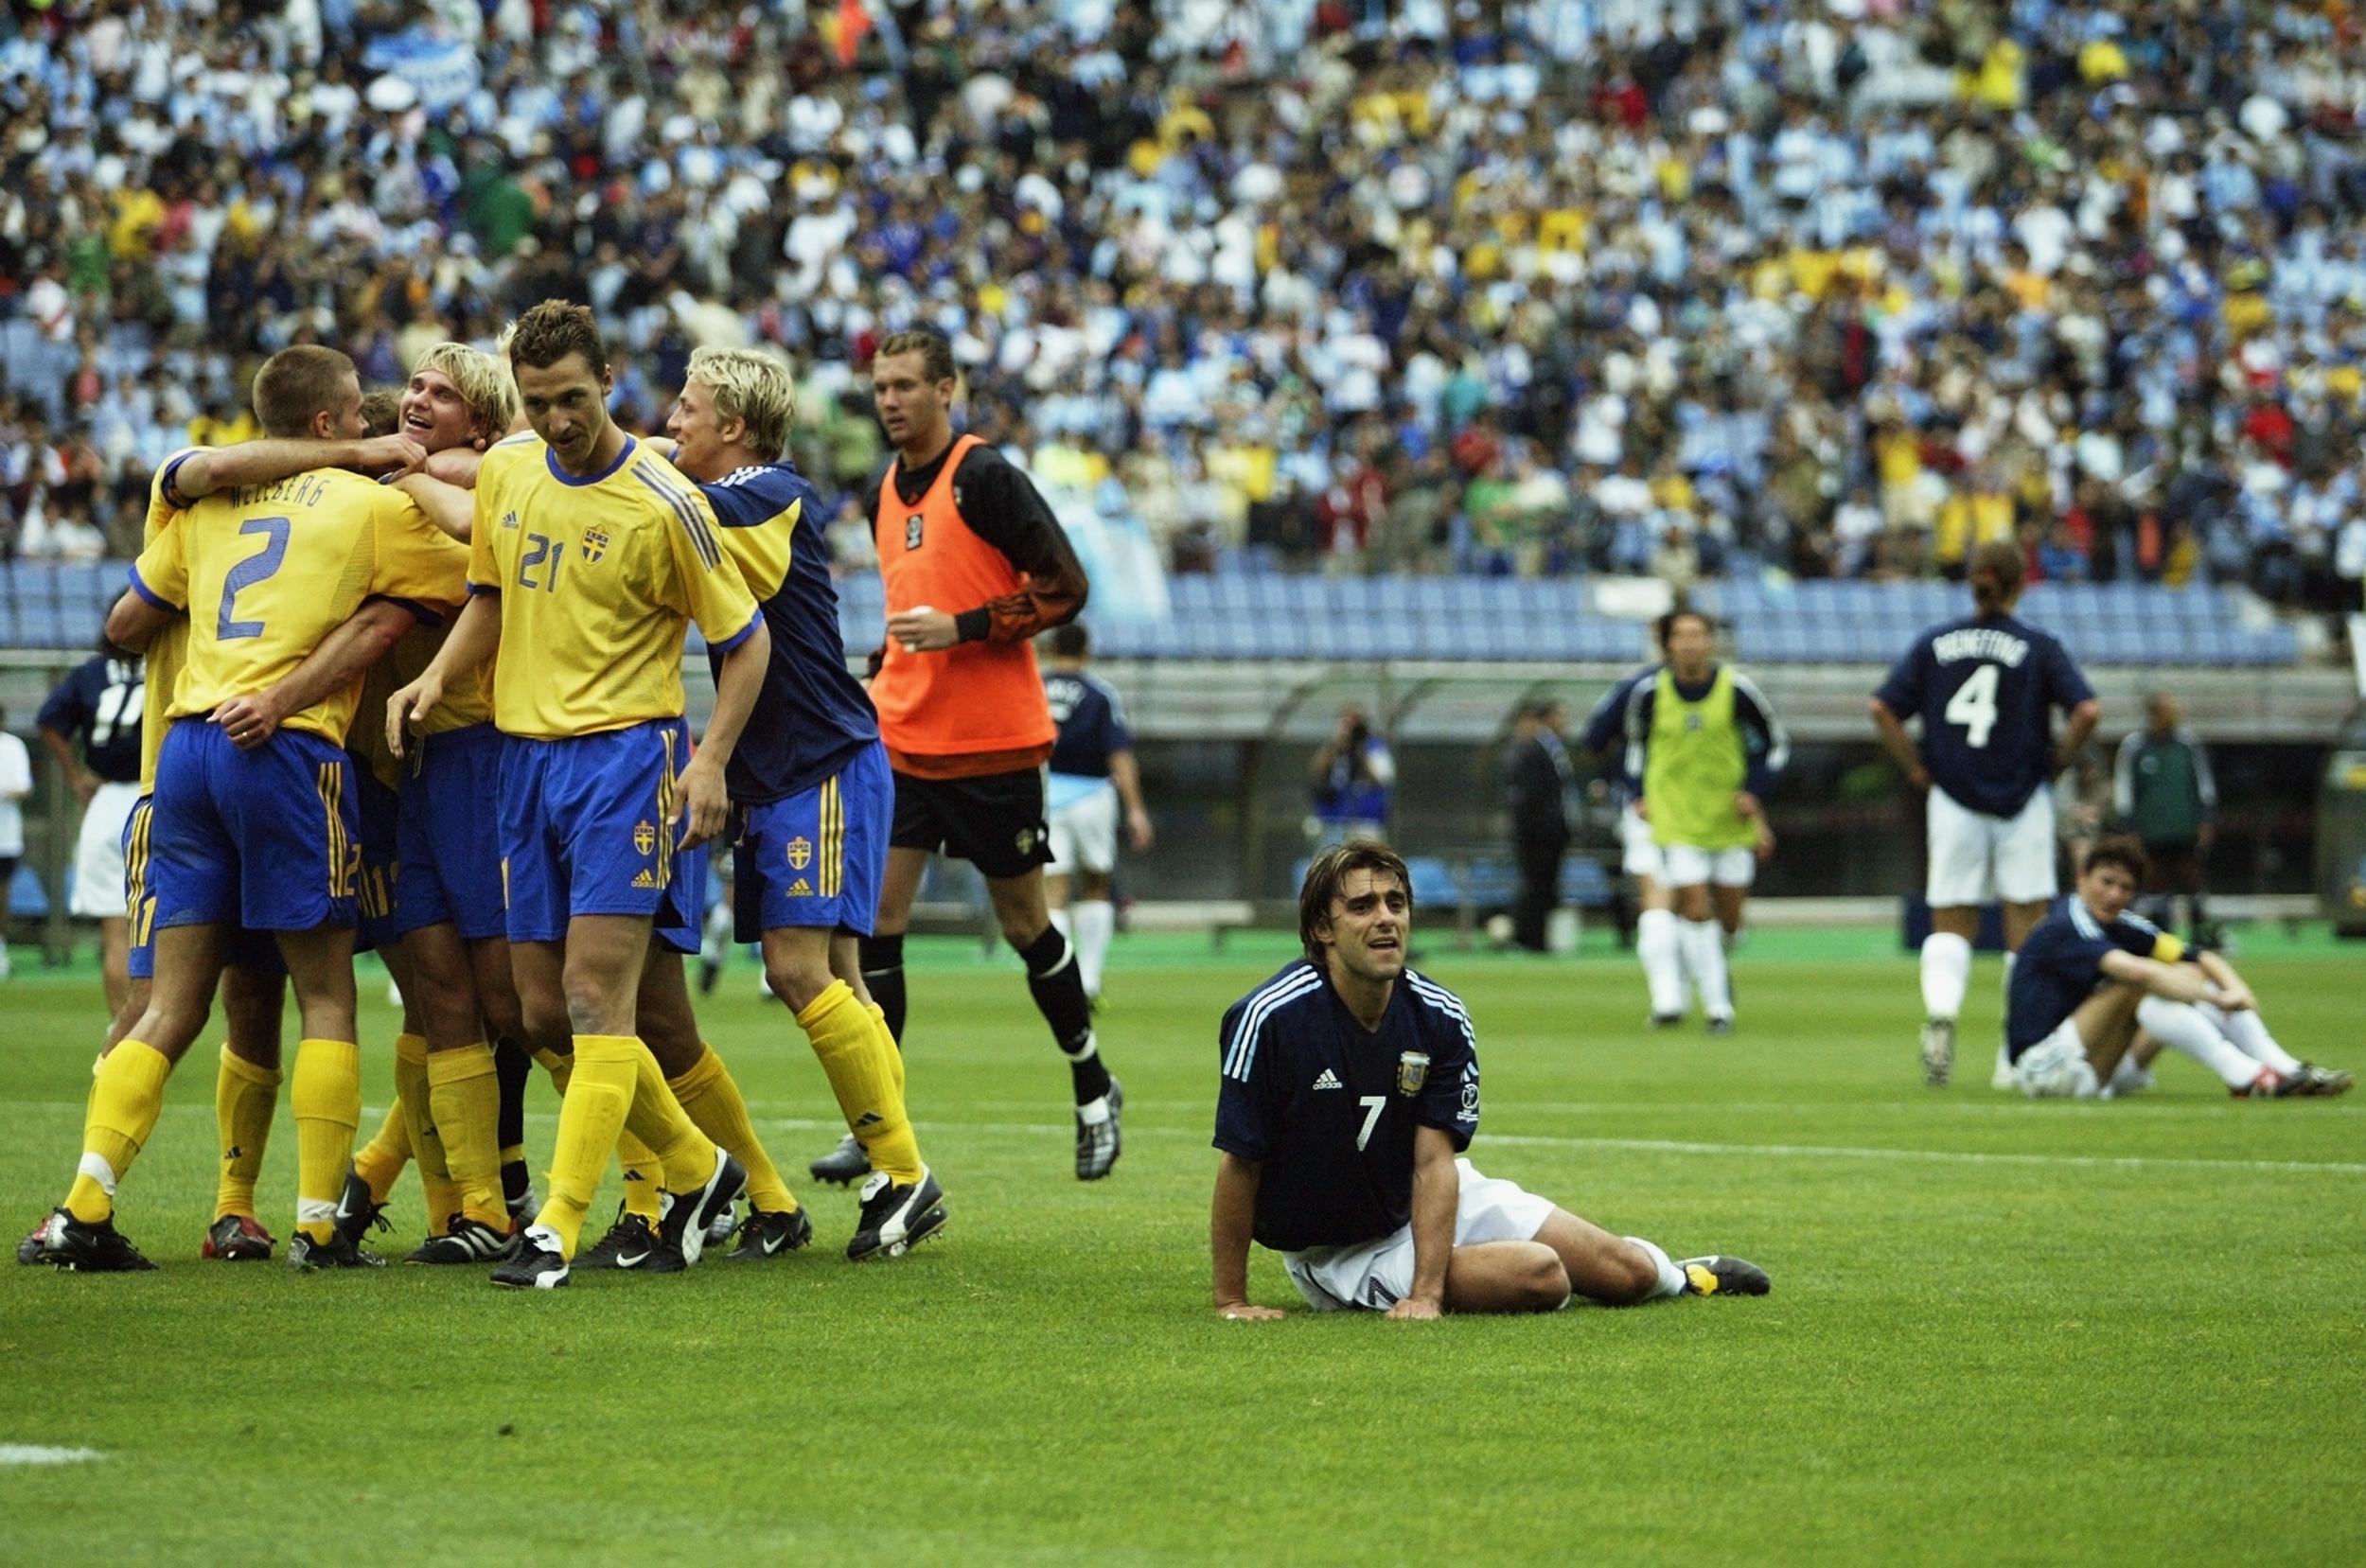 Argentina's draw with Sweden in the 2002 World Cup group stages prevented them progressing to the knockouts